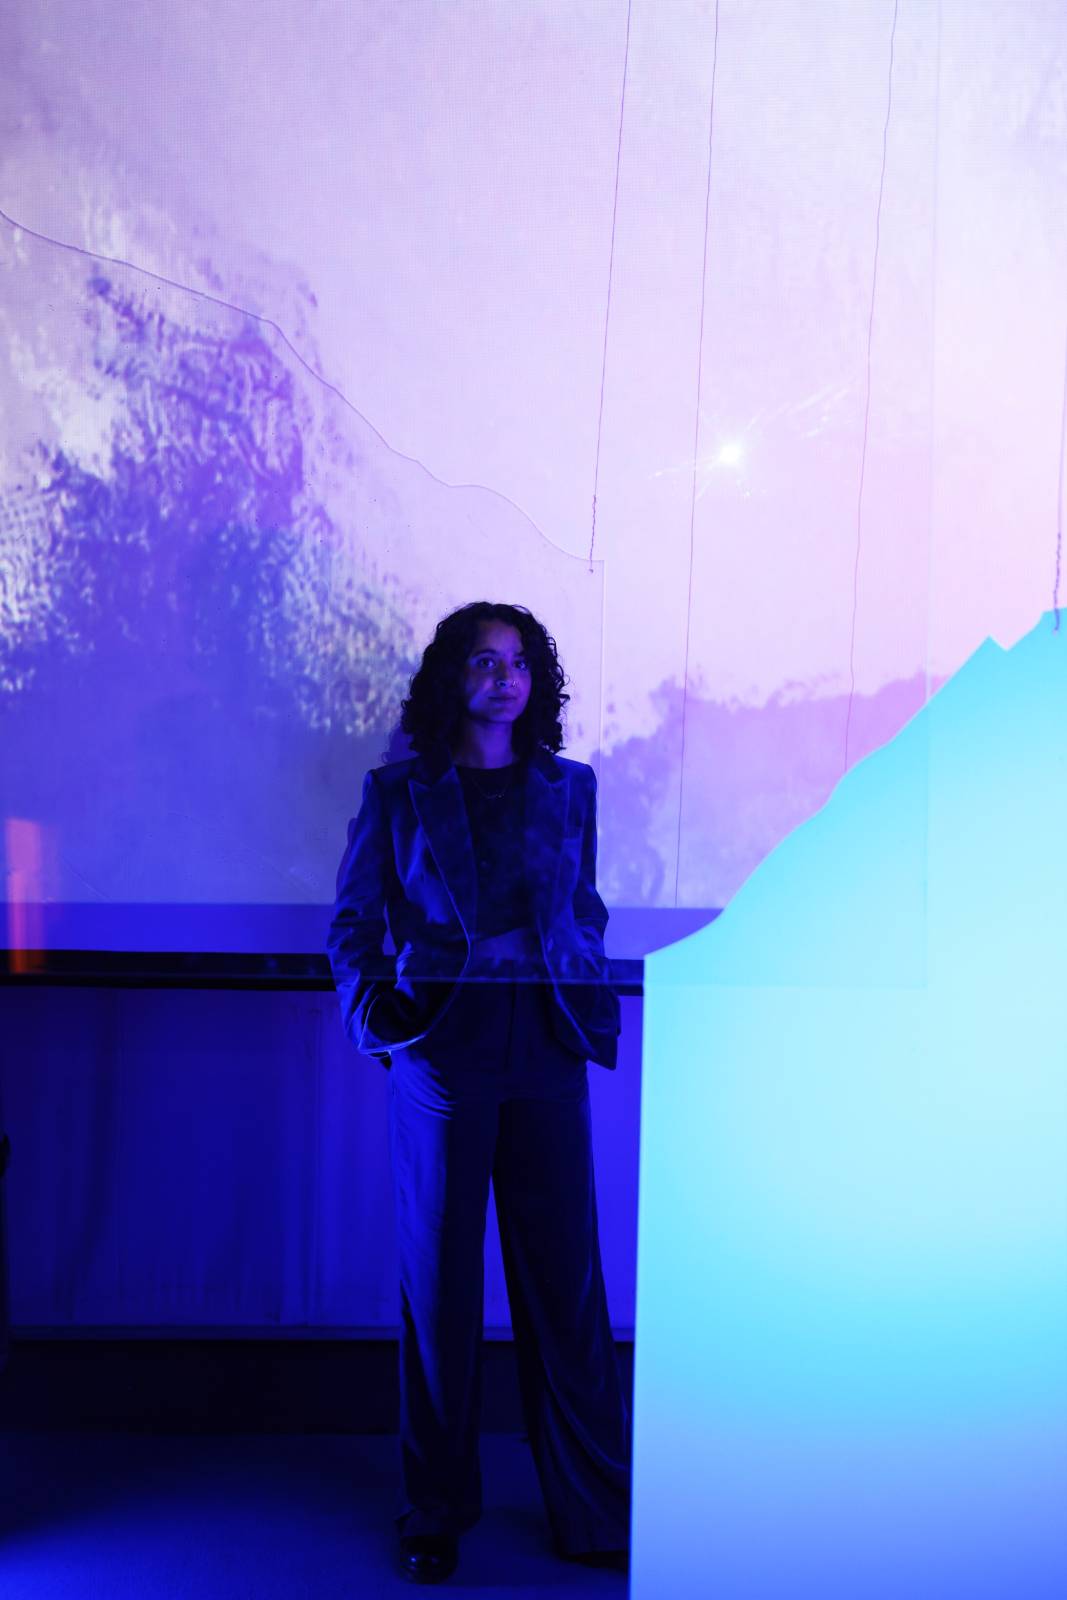 Jessica has short brown curly hair, wears a blue suit jacket and black top underneath. Her face and body are obscured by a purple projected image. Photo by Sara Benabdallah.